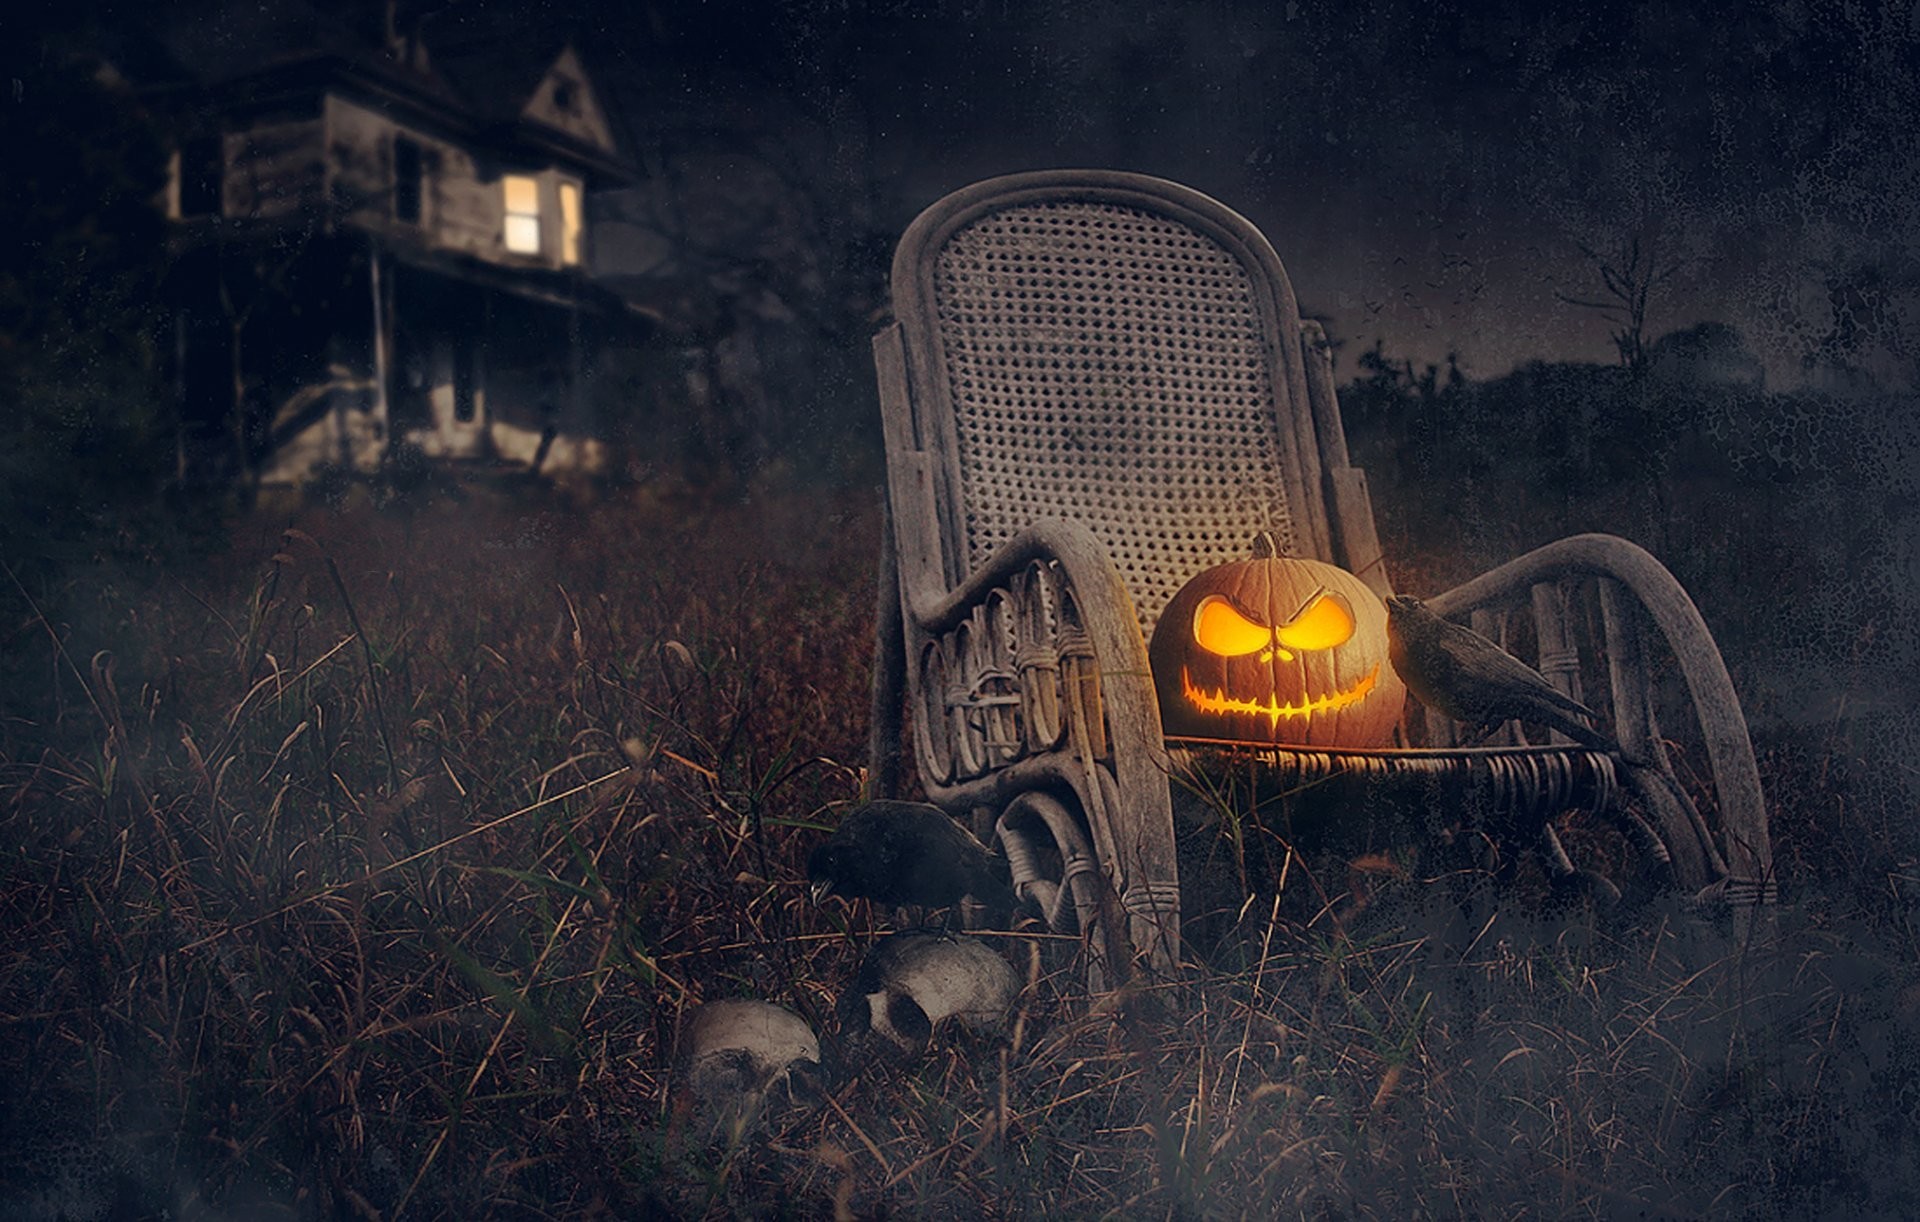 1920x1222 Full Size of Halloween: Halloweenoliday Pumpkinouse Skull Rooks Night  Remarkable Why Is Picture Ideas Fact ...